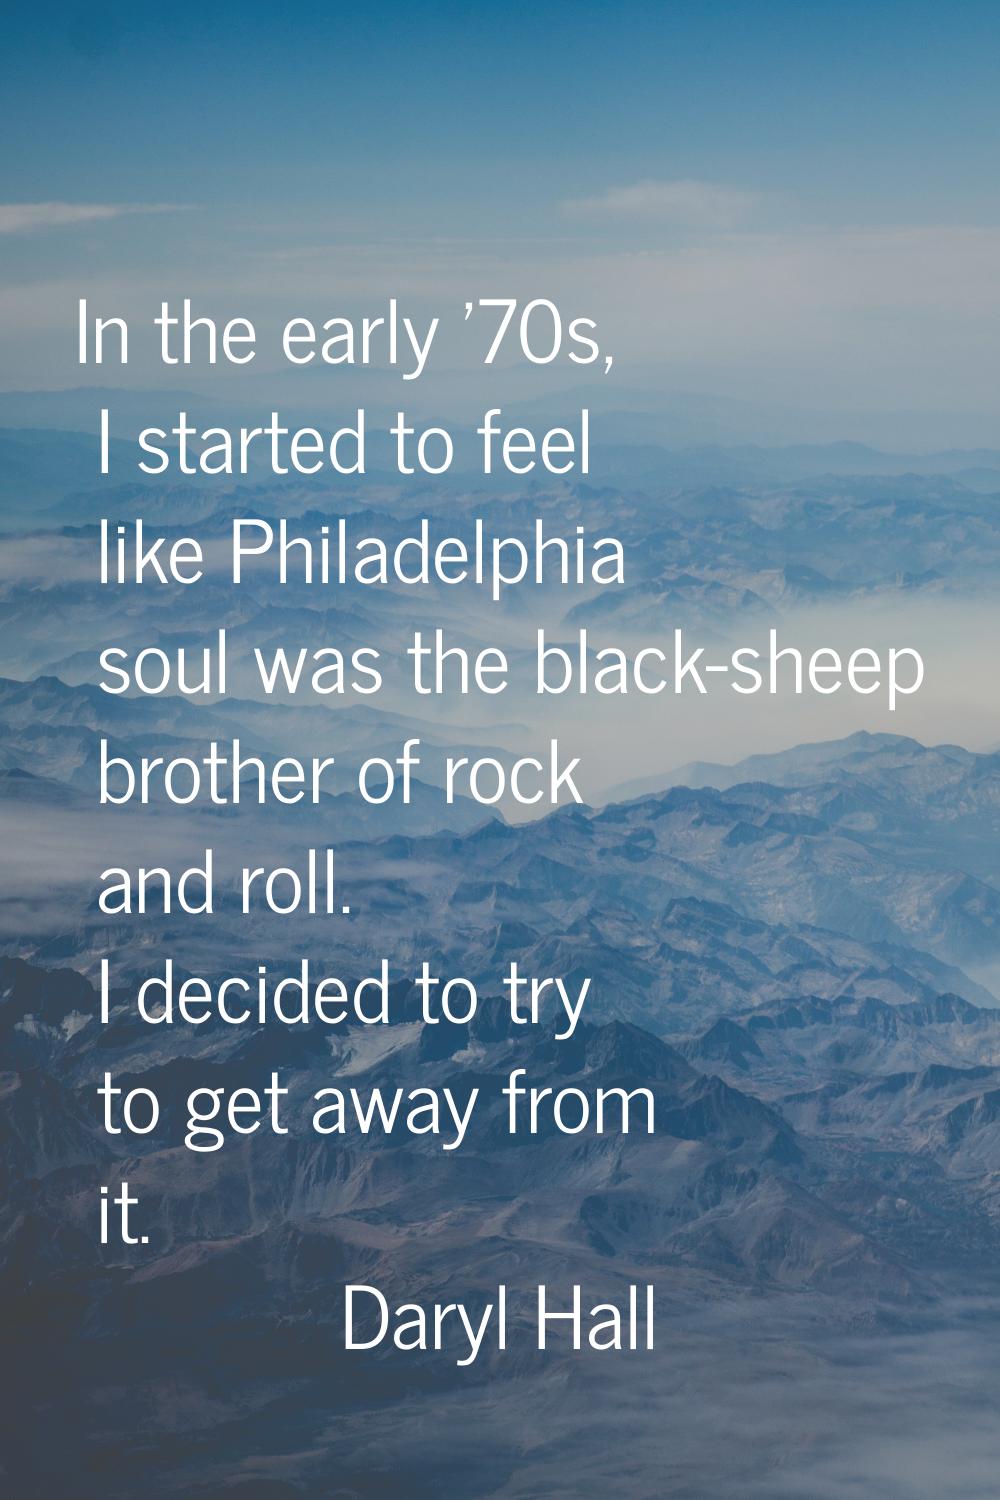 In the early '70s, I started to feel like Philadelphia soul was the black-sheep brother of rock and